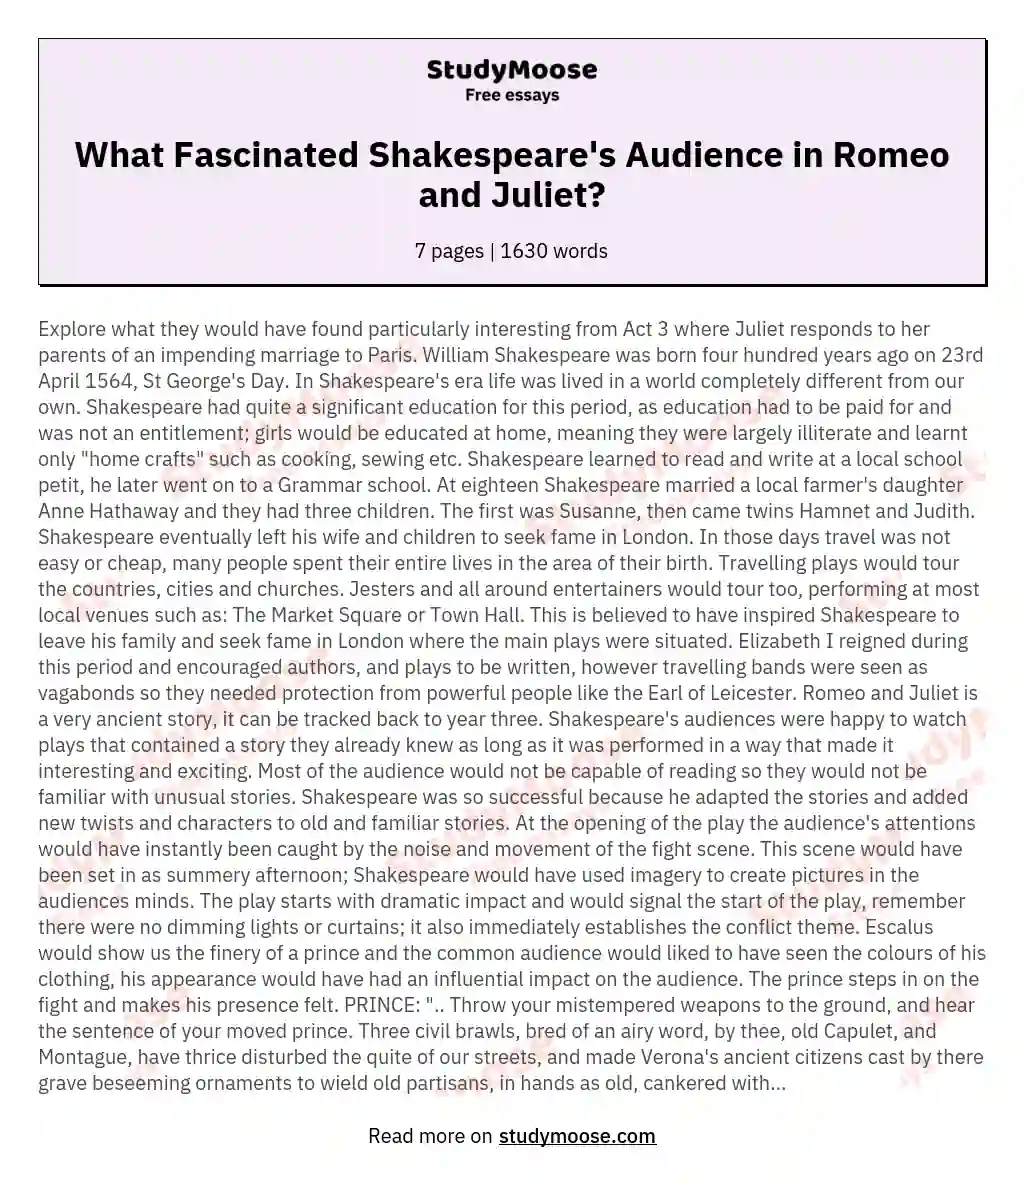 What Fascinated Shakespeare's Audience in Romeo and Juliet? essay